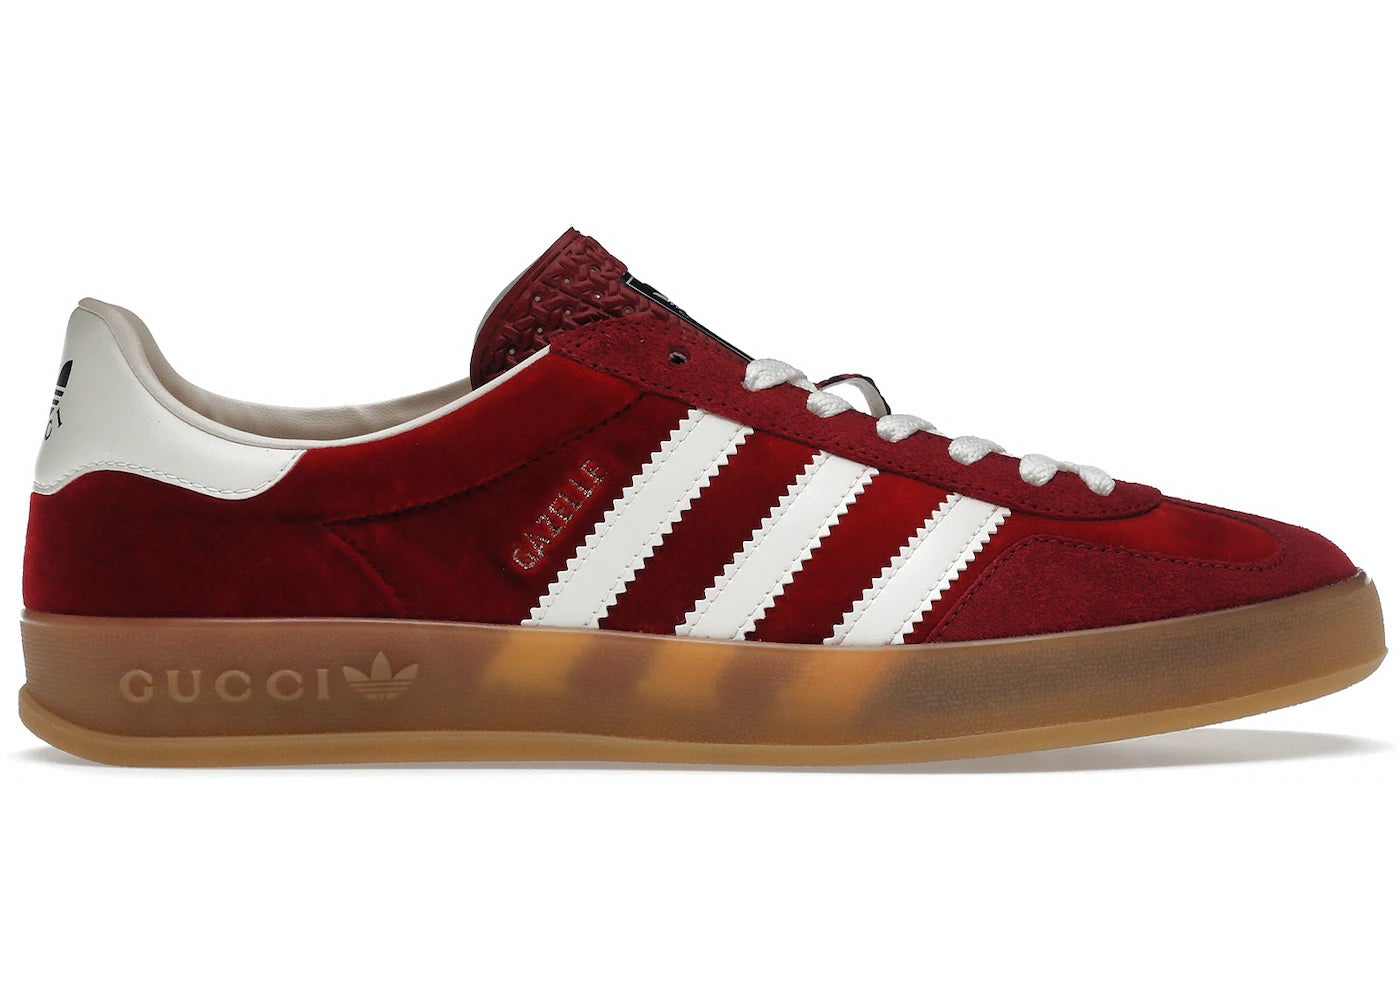 Adidas x Gucci Gazelle Blue/Red/Yellow / Men's US 8.5 / New